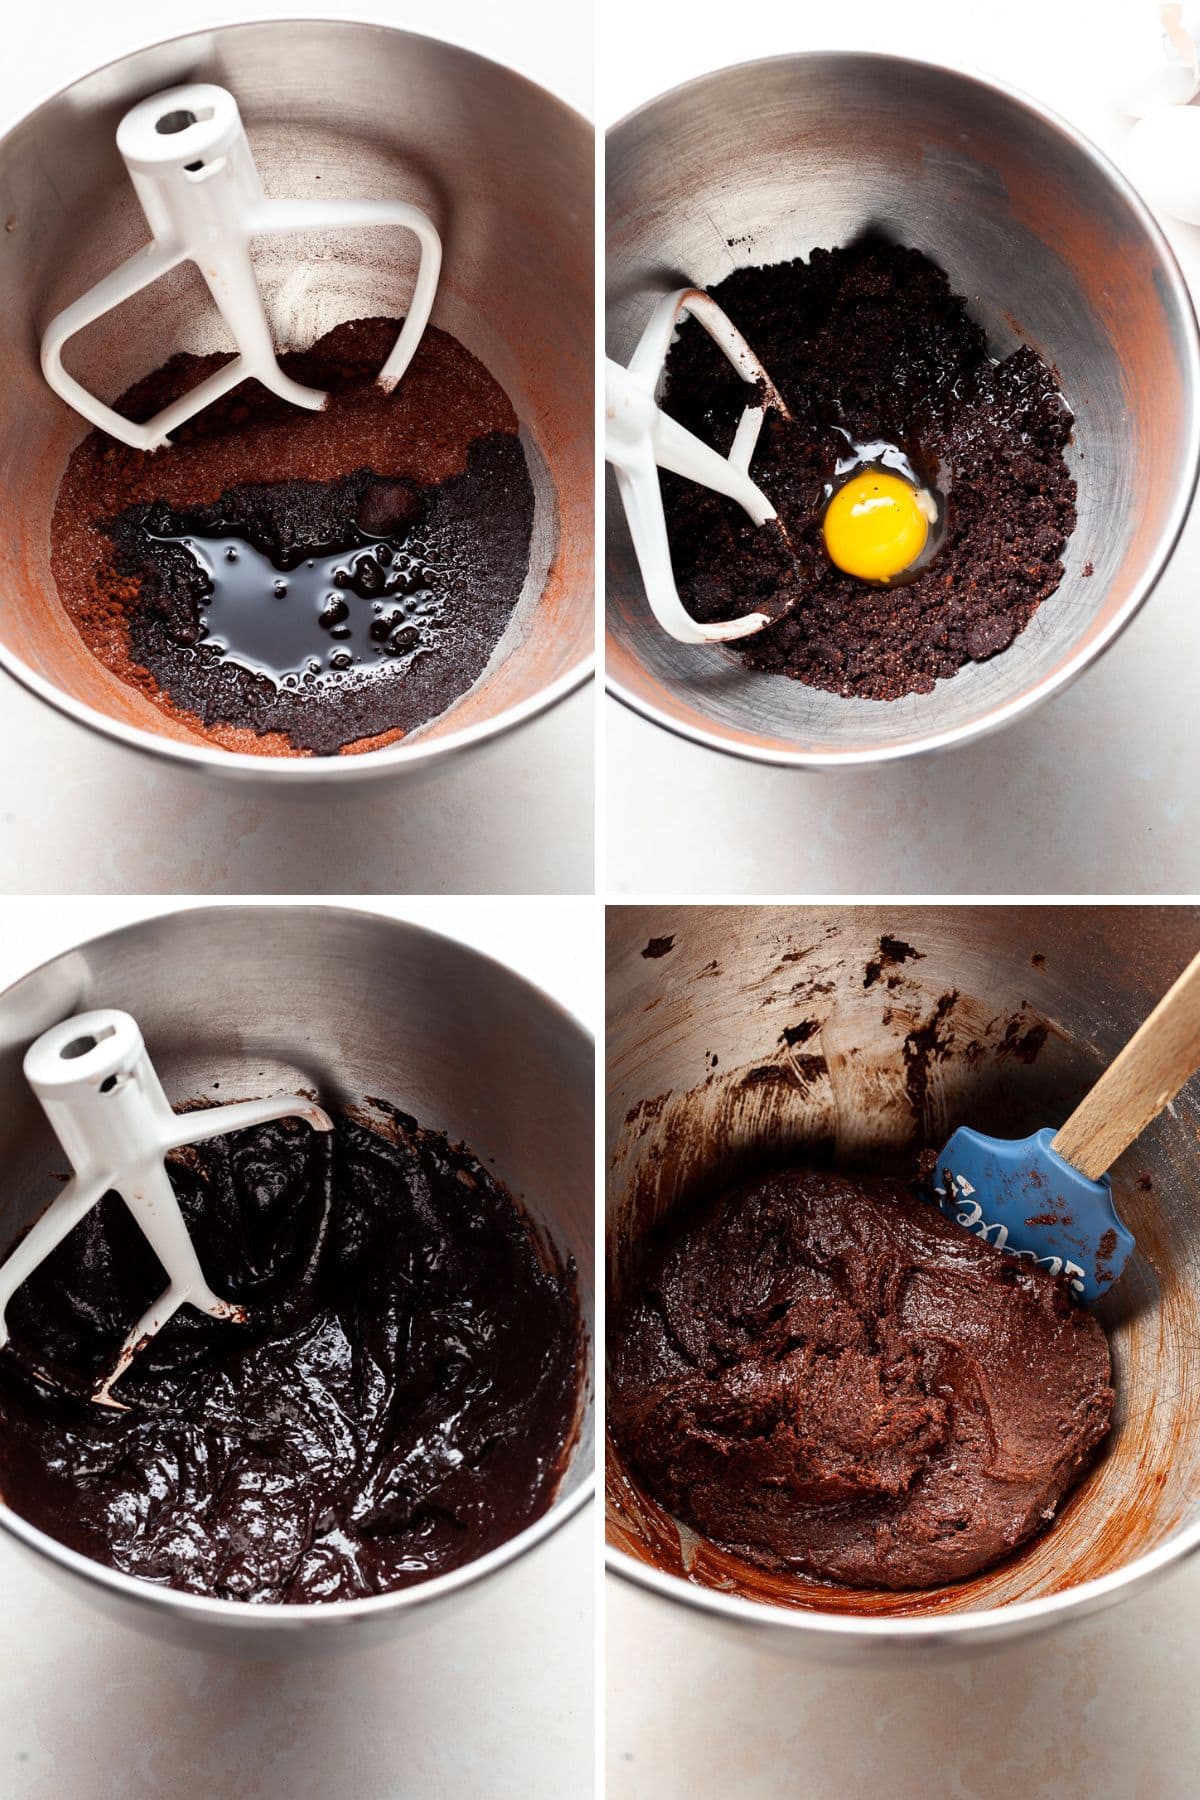 Step by step how to make gluten free chocolate crinkles
